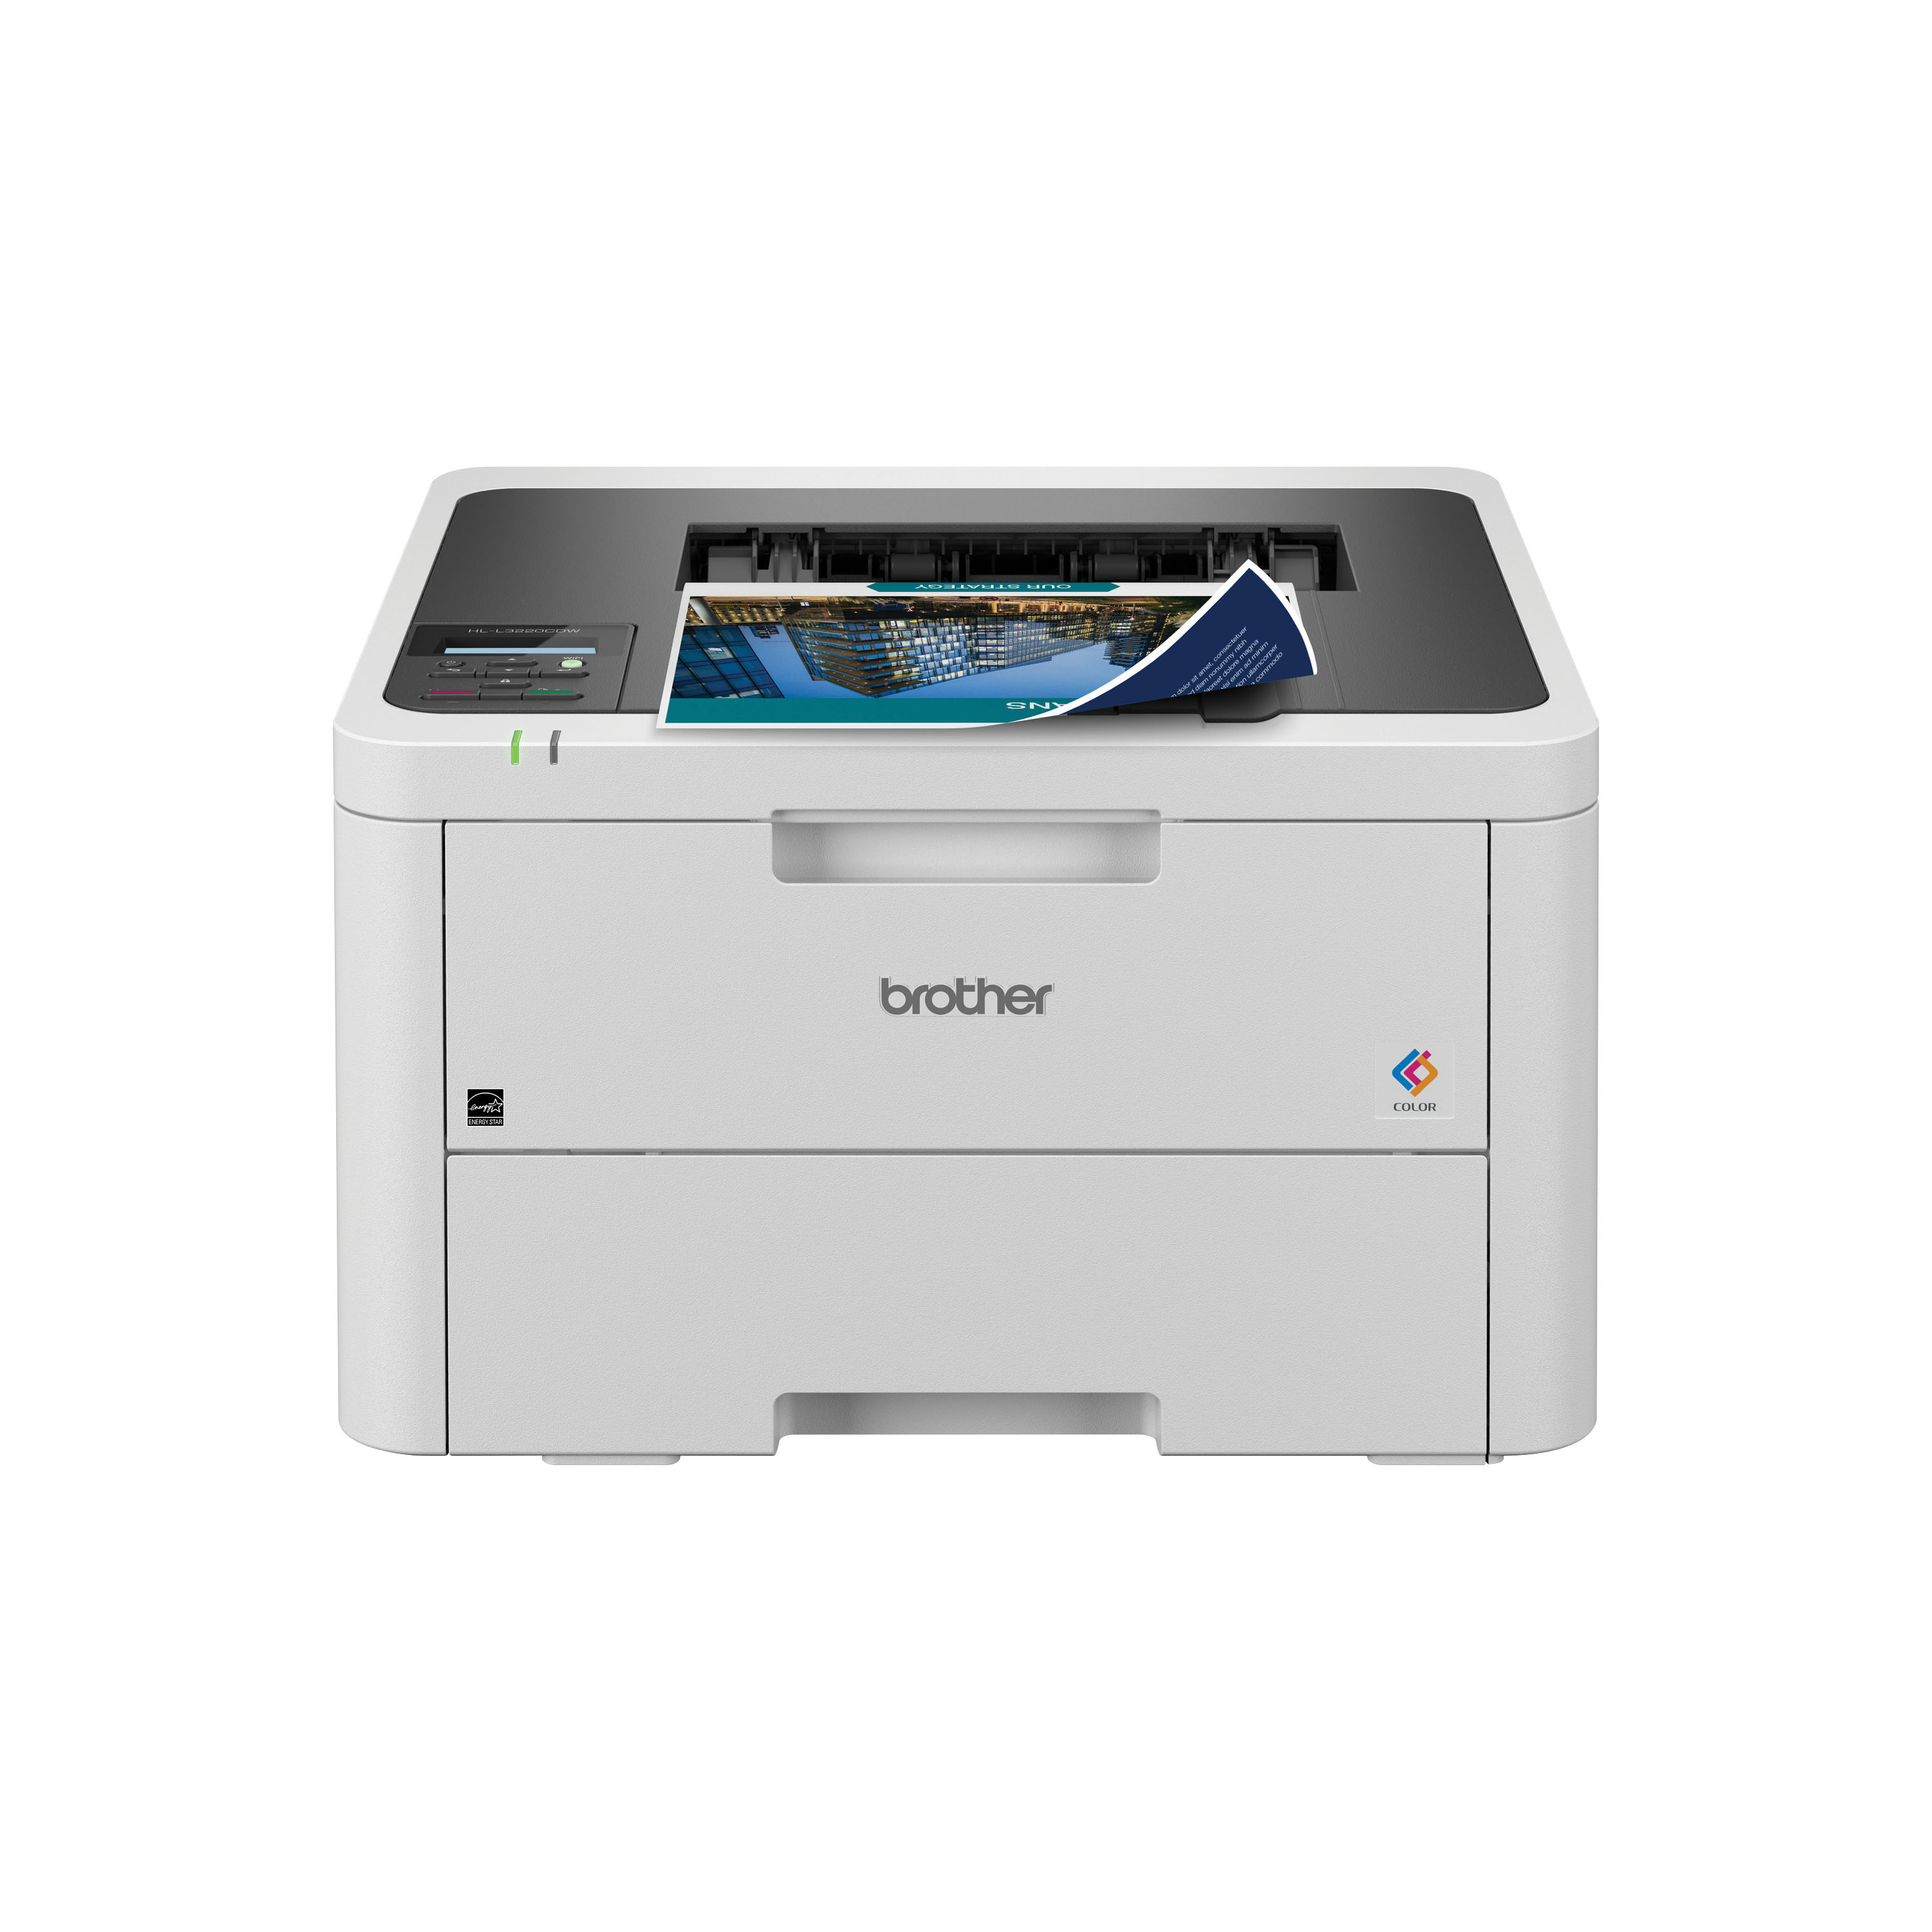 

Brother HLL3220CDW Compact Digital Color Printer with Laser Quality Output, Duplex and Mobile Device Printing, Refresh Subscription Ready